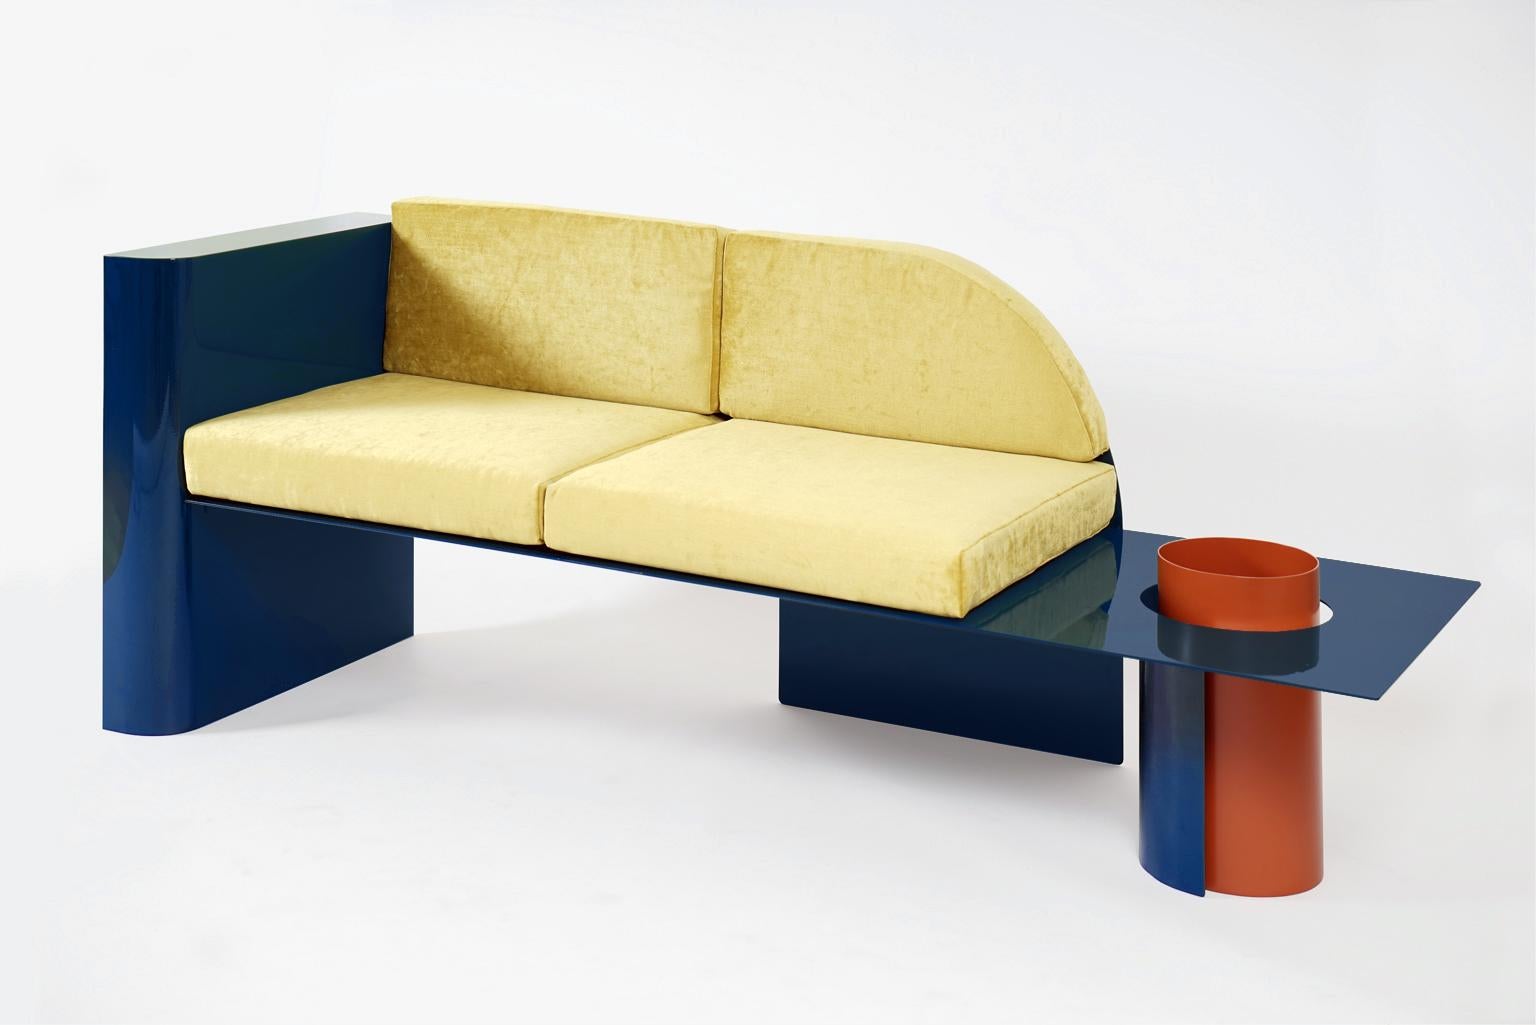  Blue Modern Sofa in Powder-Coated Steel with Planter Side Table (Moderne) im Angebot